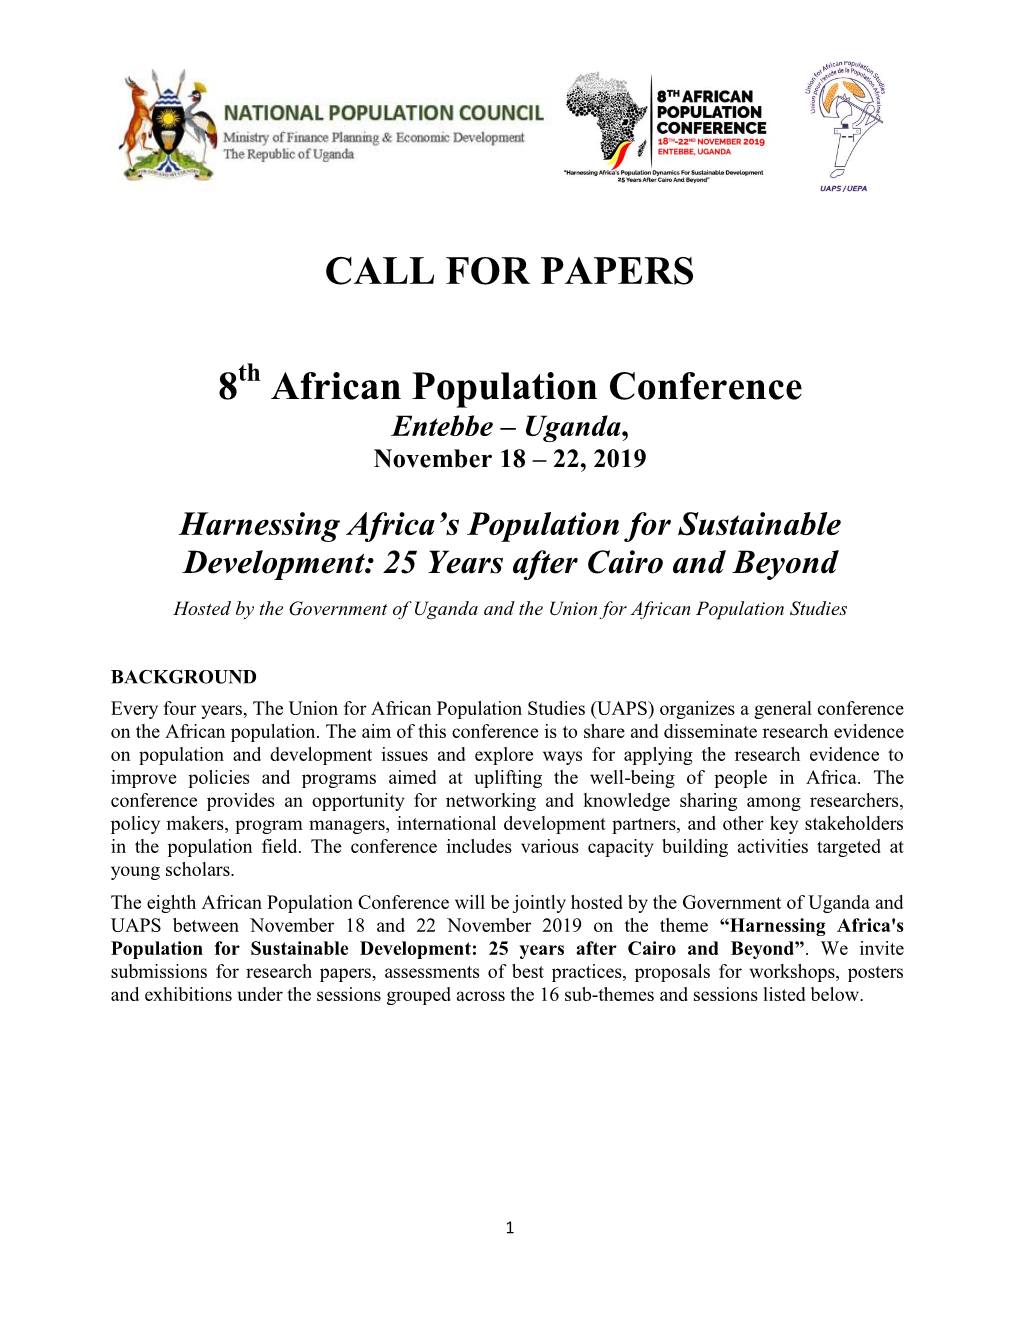 CALL for PAPERS 8 African Population Conference